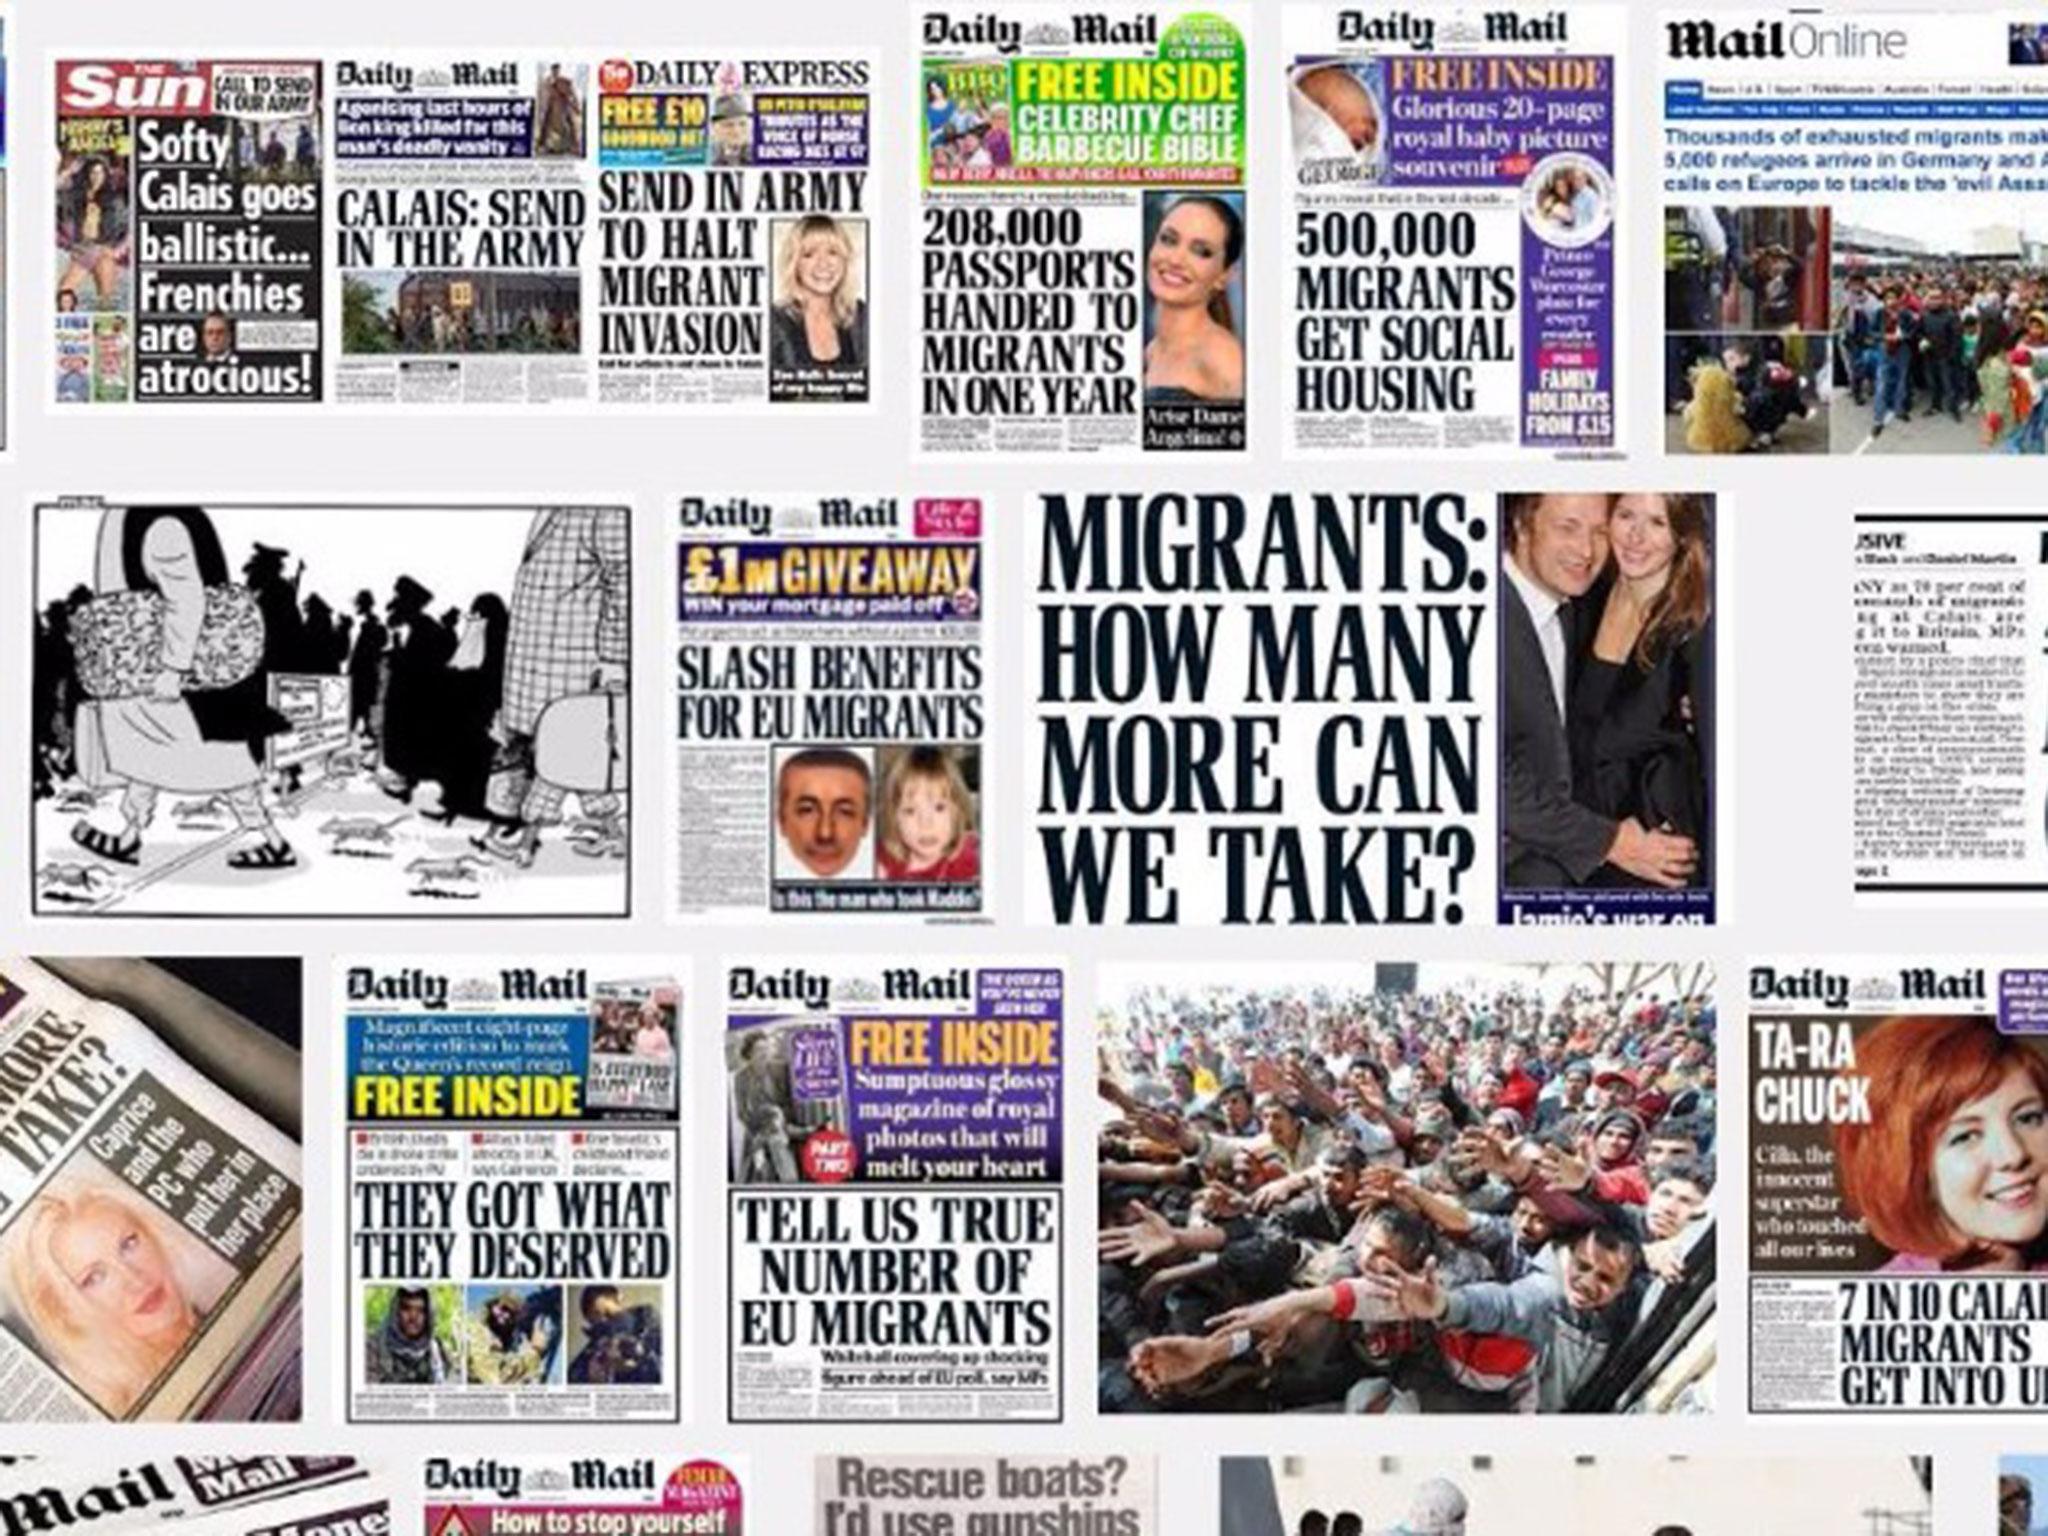 In 2015 the United Nations publicly urged the UK to tackle hate speech in British media, specifically citing an article in The Sun in which migrants were described as 'cockroaches